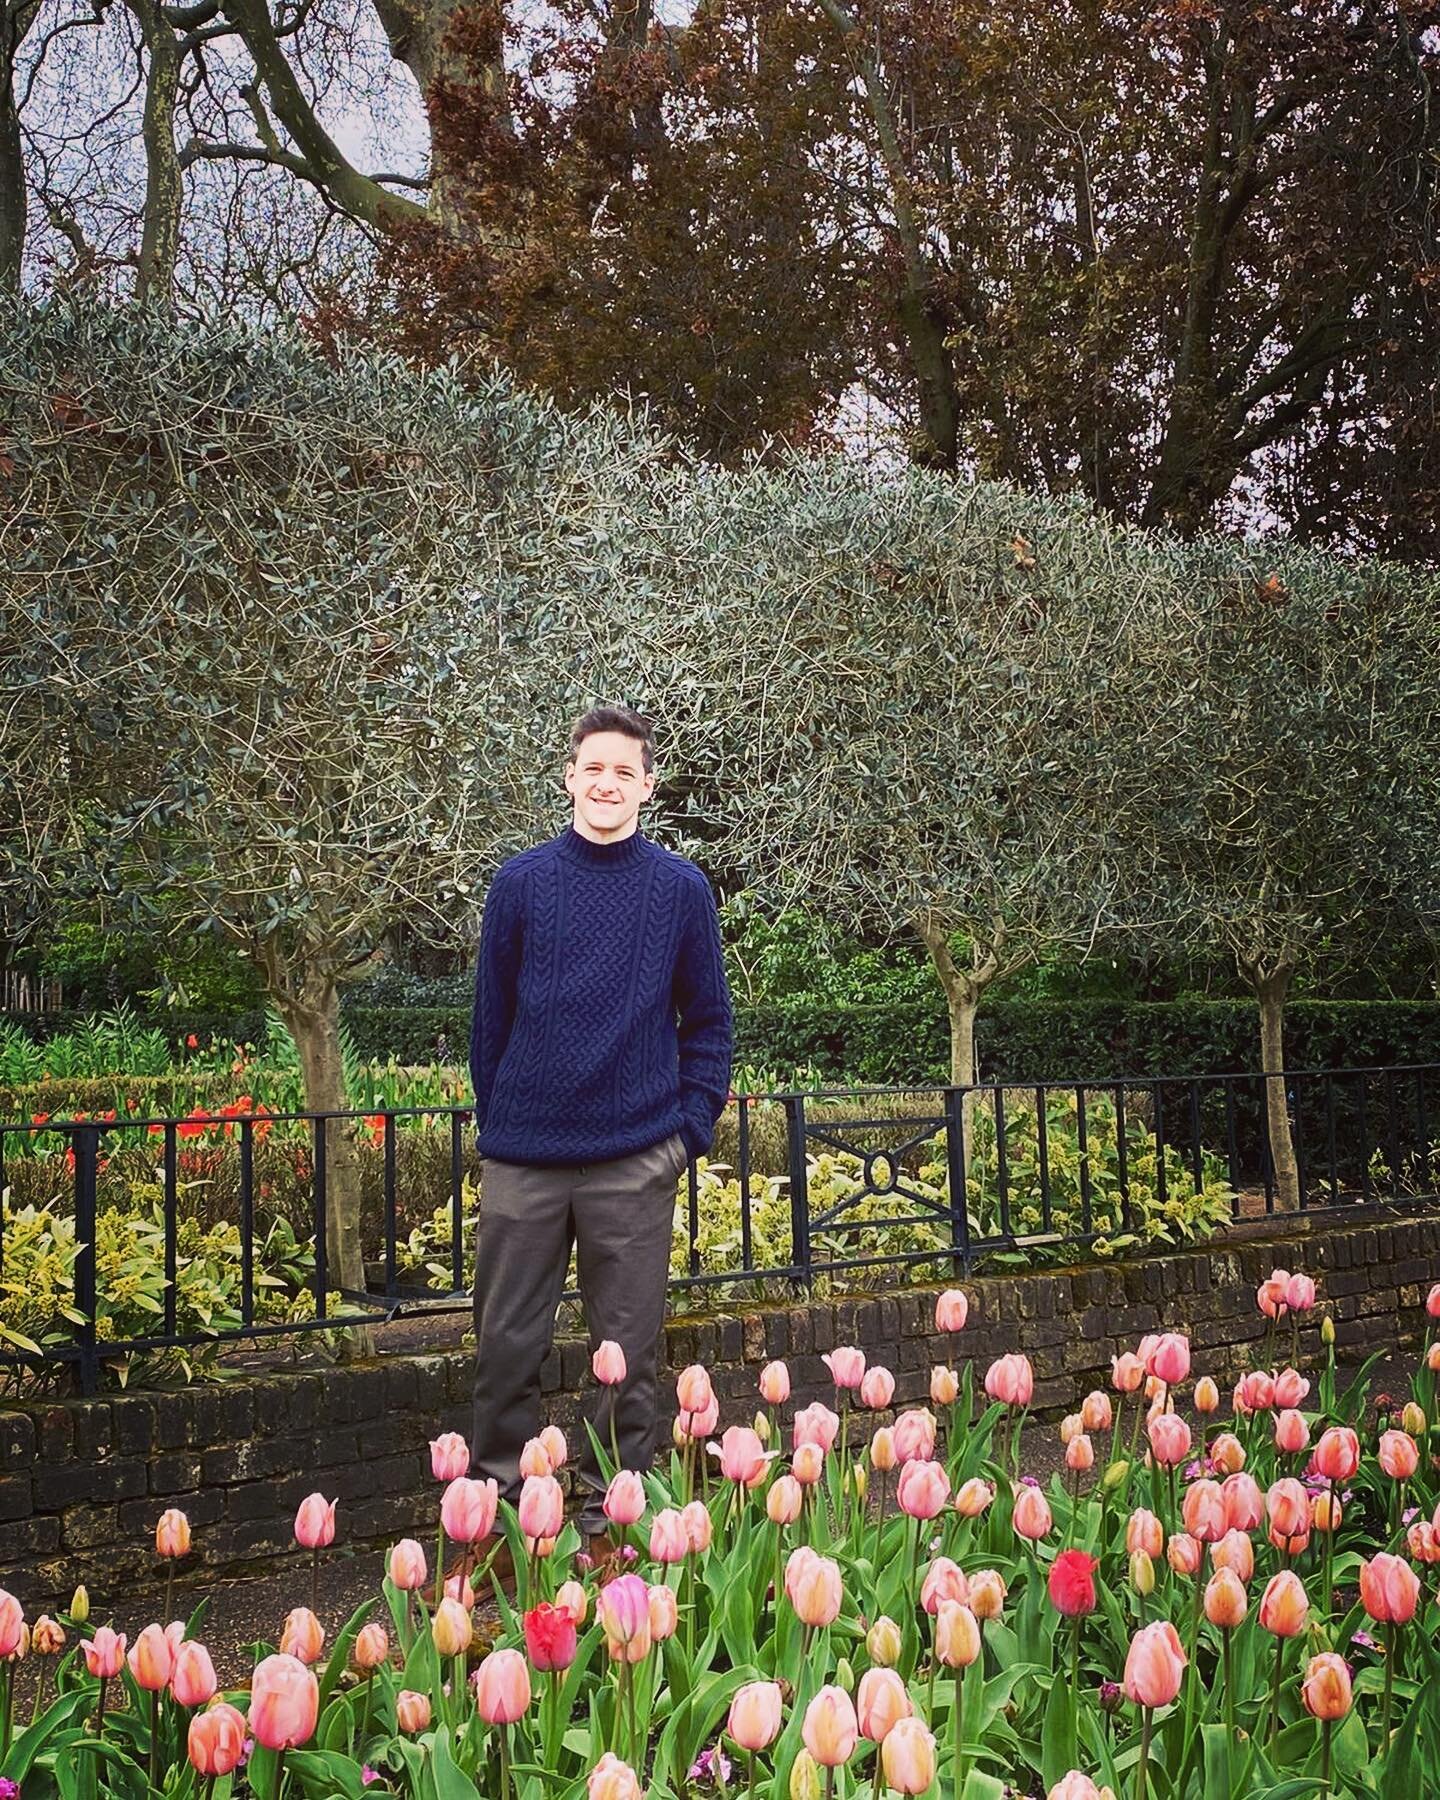 Loved visiting Holland Park. Beautiful Park &amp; Gardens. My favourite area was the Kyoto Garden for some quiet reflection and then, I came across a bed of Tulips (my favourite flower)
☺️🌷

.
.
.
.
#hollandpark #london #park #nature #kyotogarden #d